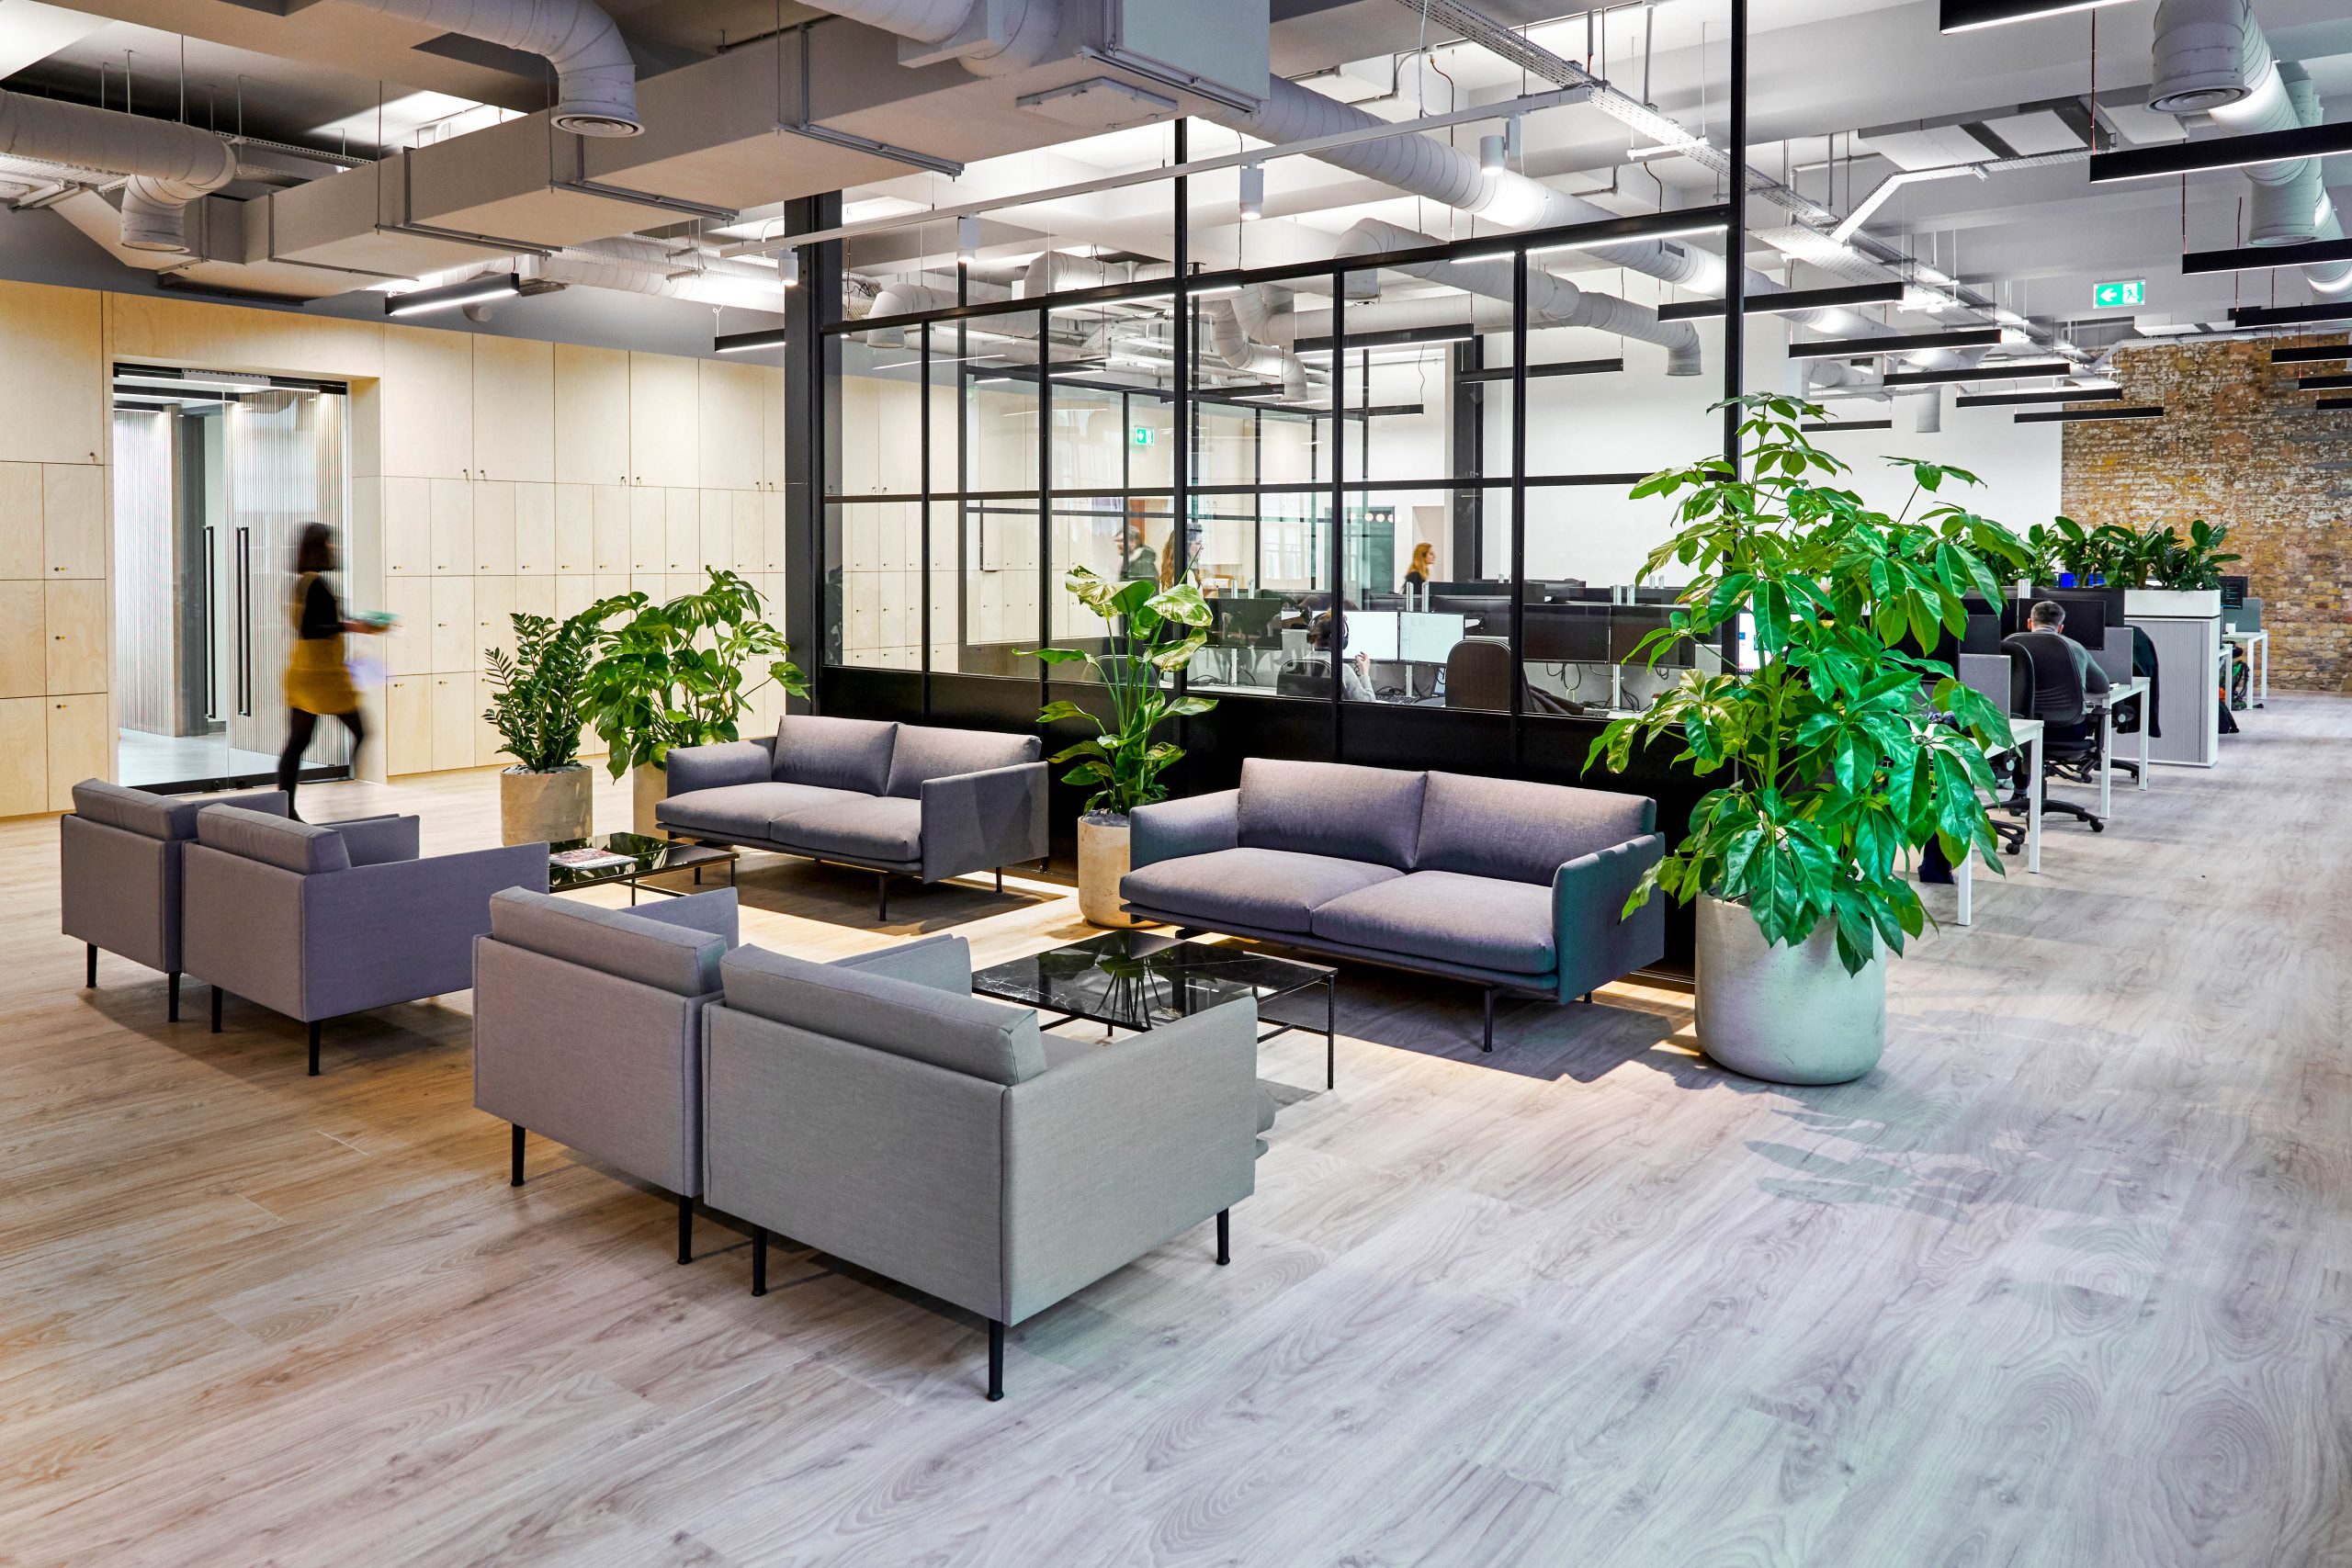 3 Ways You Can Utilise Plants into Your Office Design